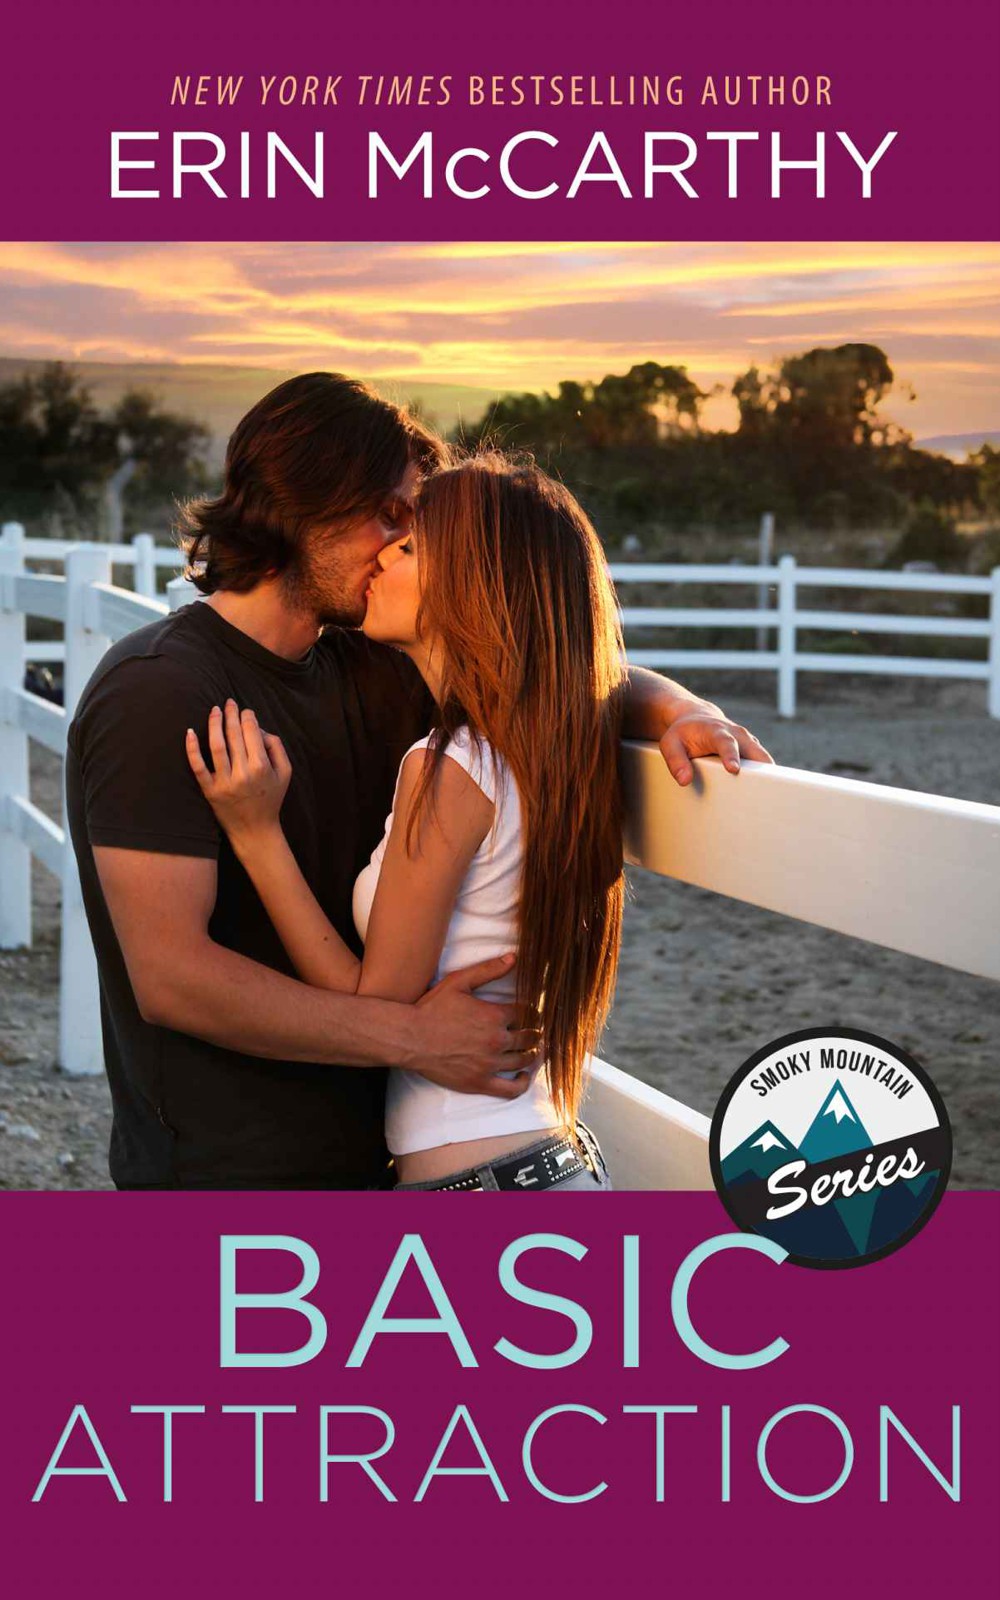 Basic Attraction by Erin McCarthy